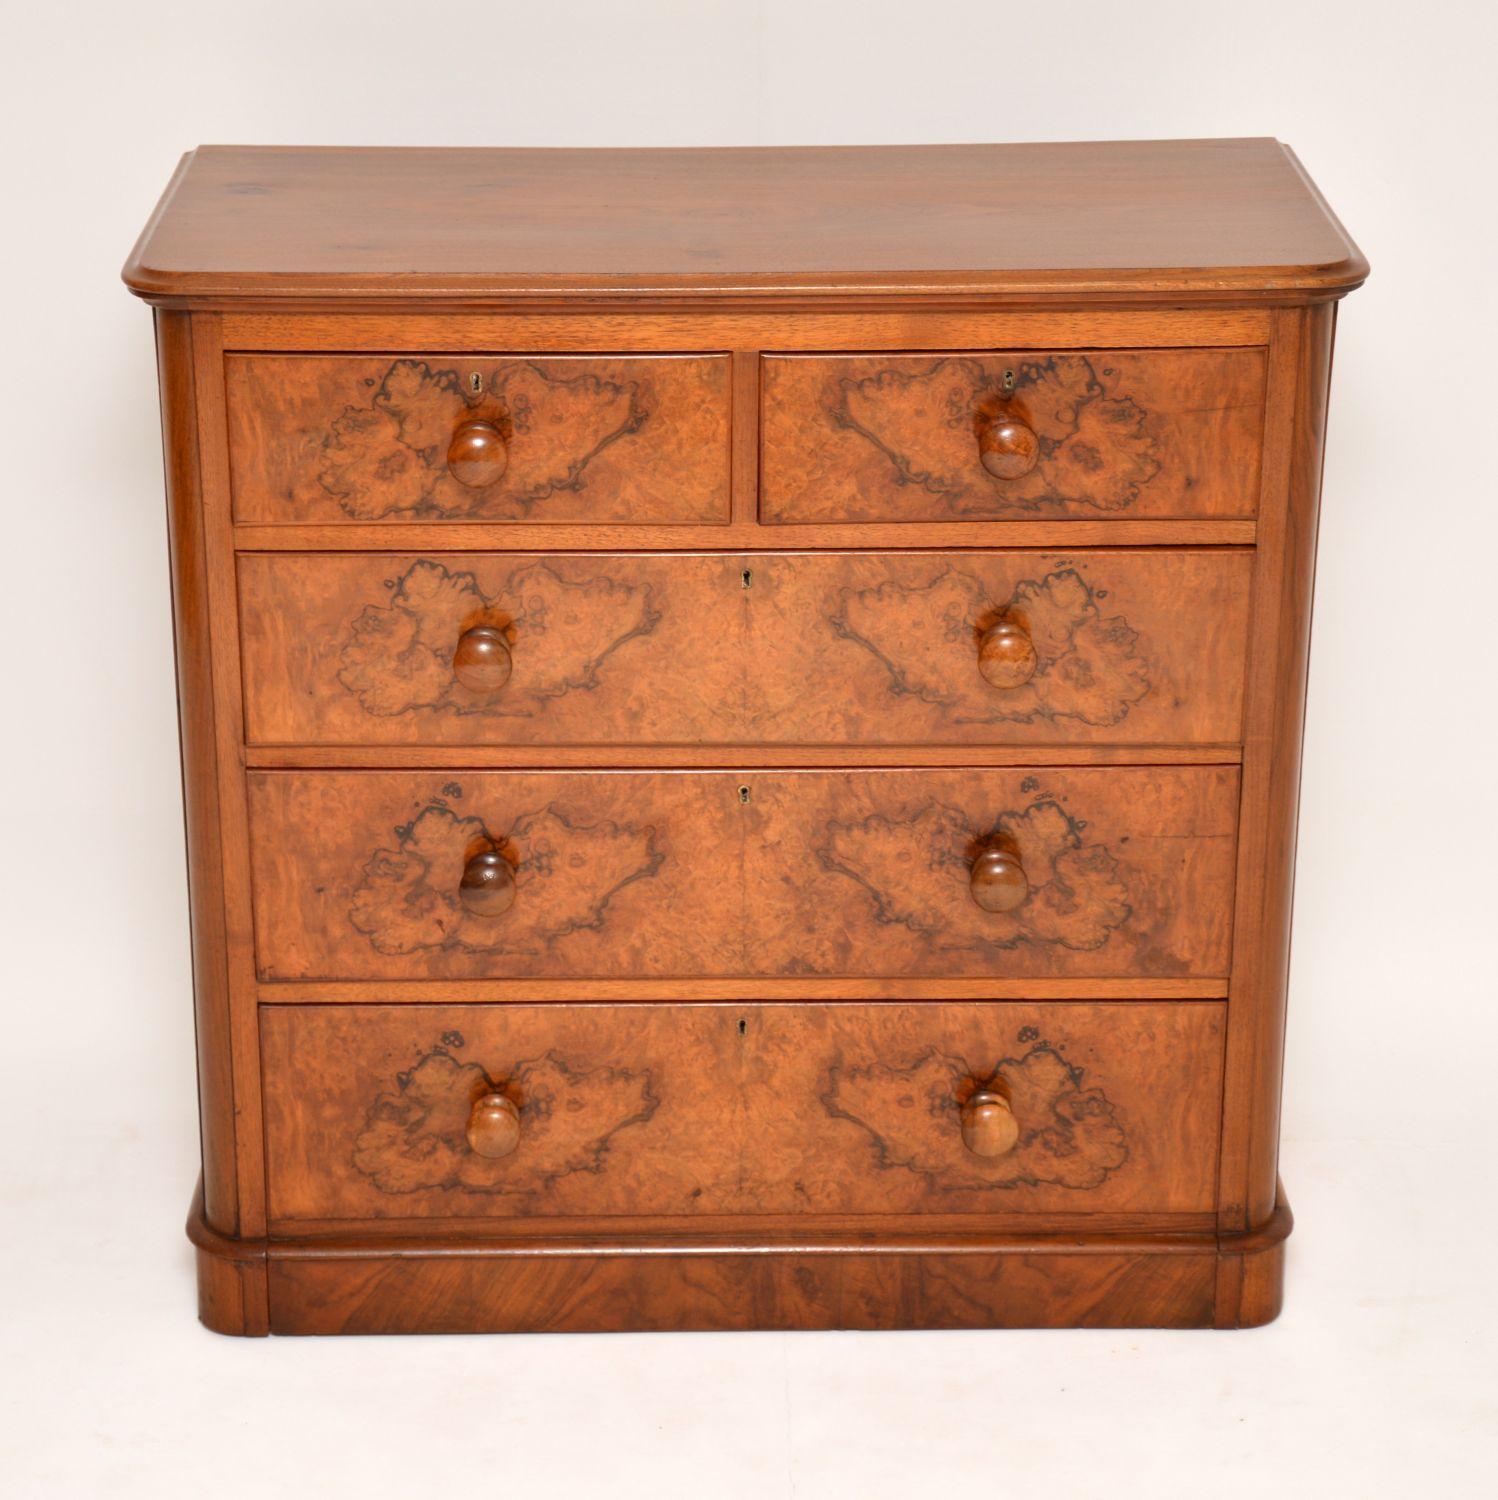 Mid size antique Victorian burr walnut chest of drawers with rounded corners, in excellent original condition and dating from the 1860s period. It has a solid walnut top and sides with beautifully patterned burr walnut fronted drawers which are